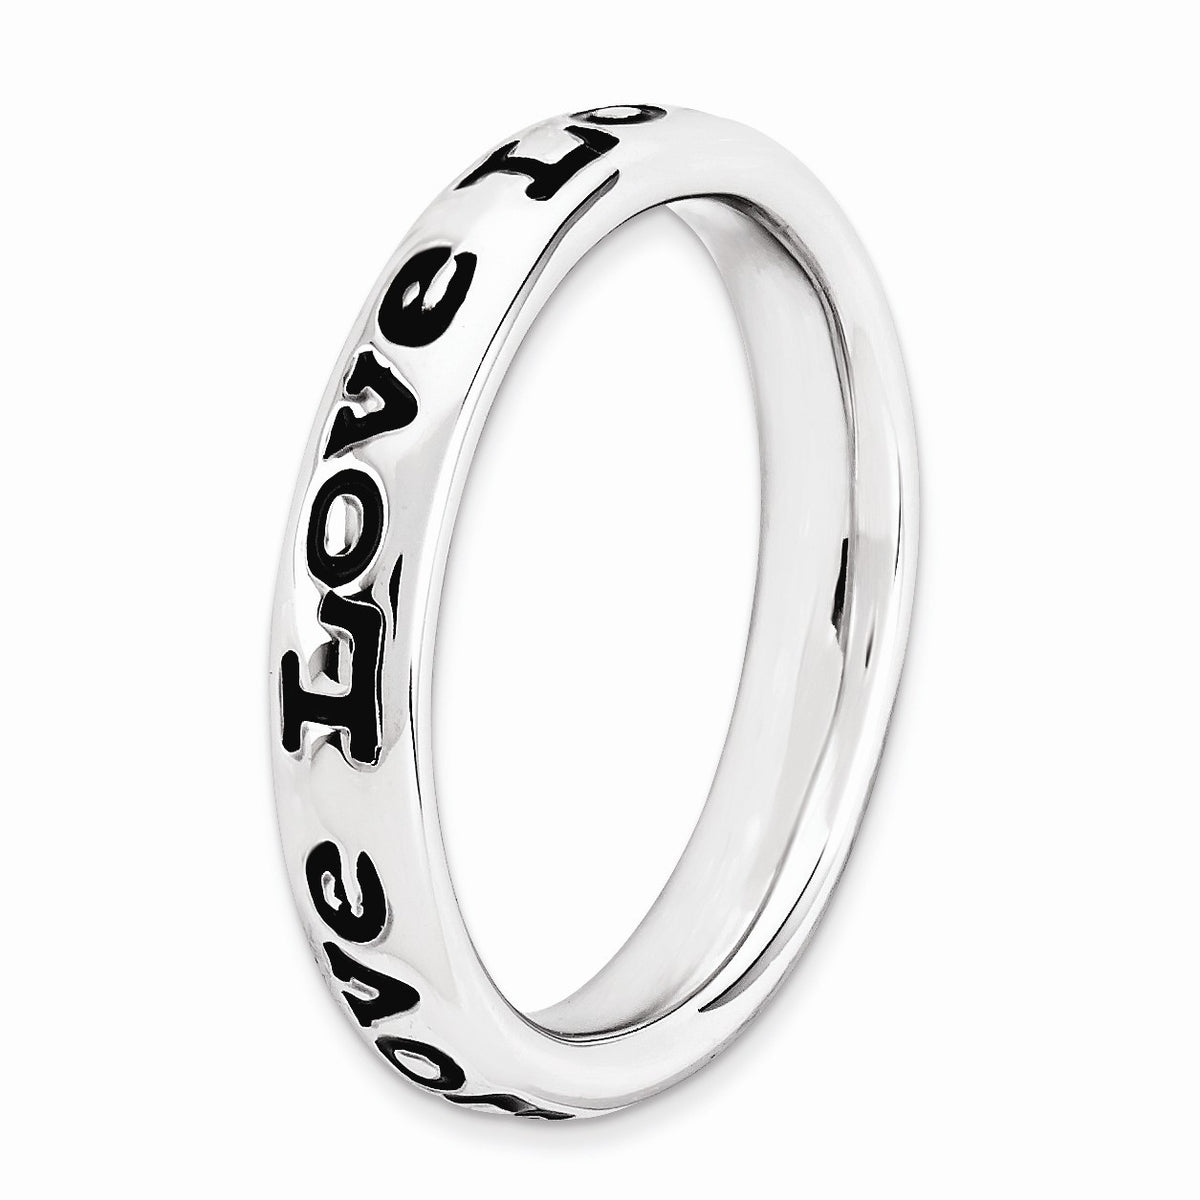 Alternate view of the Sterling Silver and Black Enameled Stackable Love Band by The Black Bow Jewelry Co.